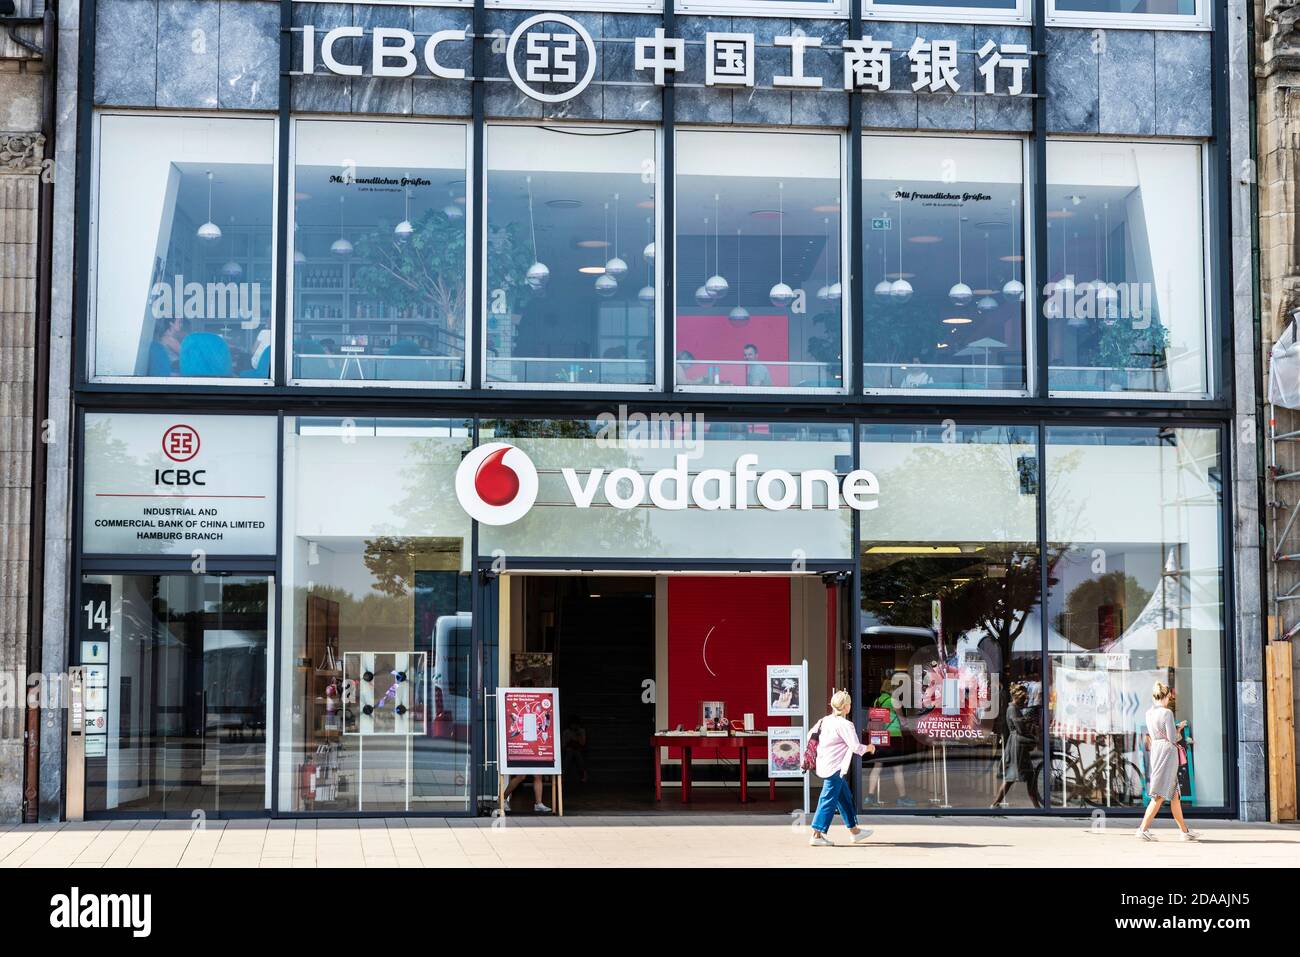 Hamburg, Germany - August 23, 2019: Vodafone shop and ICBC bank office with people around in Jungfernstieg, an urban promenade in Hamburg, Germany Stock Photo